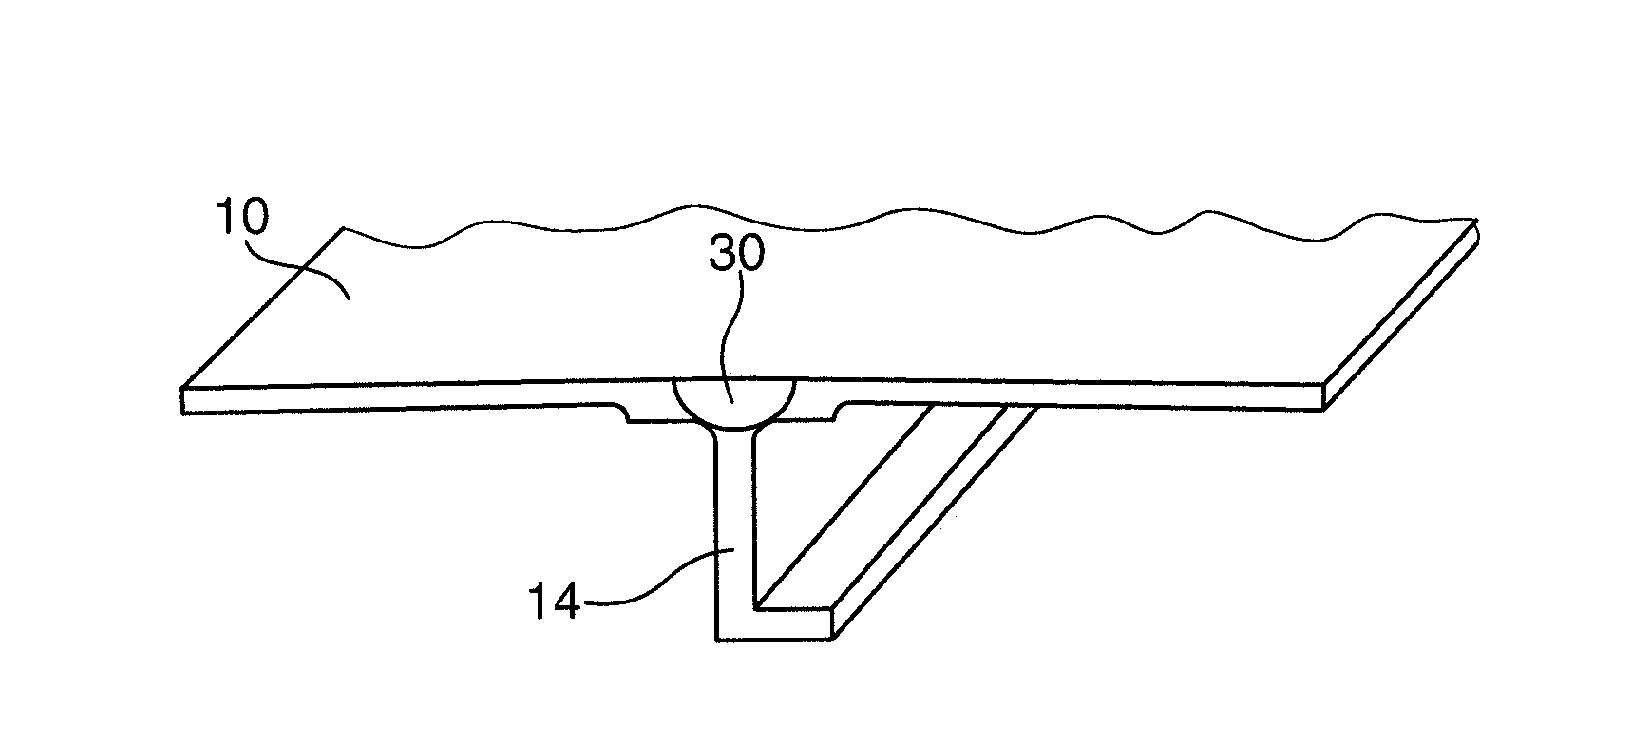 Process for connecting two aircraft fuselage segments by means of friction twist welding